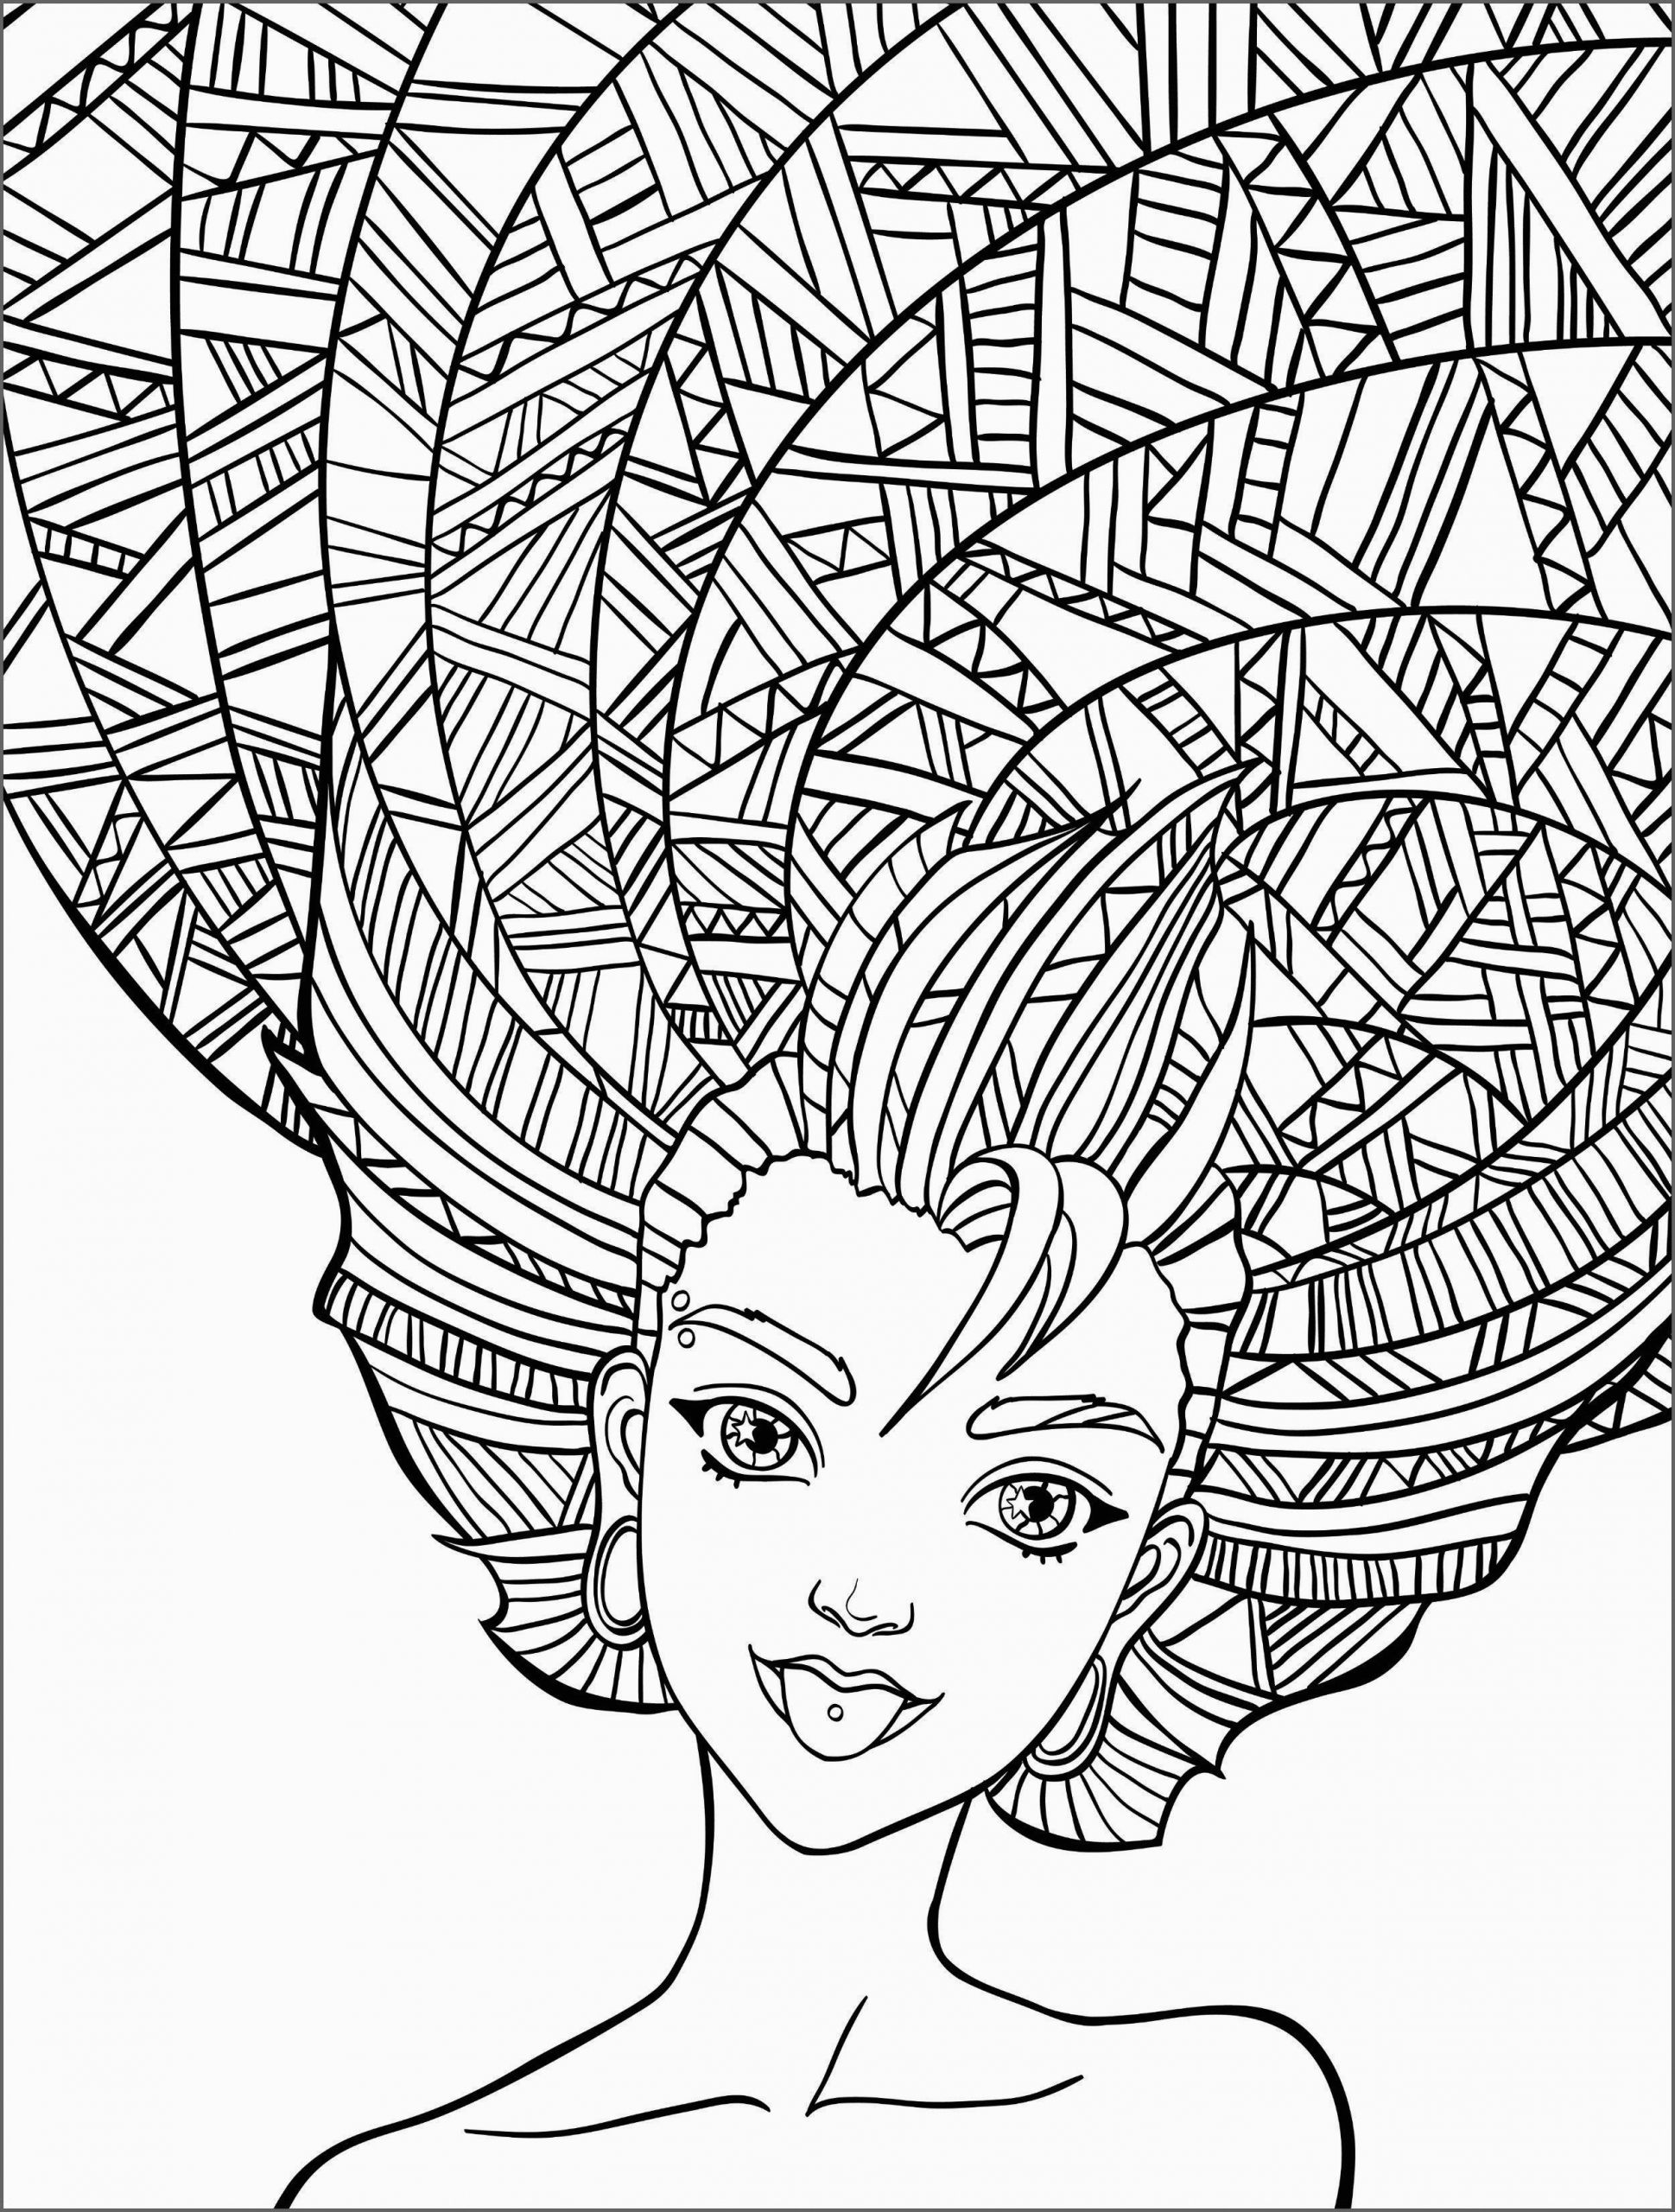 Printable Adult Coloring Pages
 Coloring Pages for Adults Best Coloring Pages For Kids